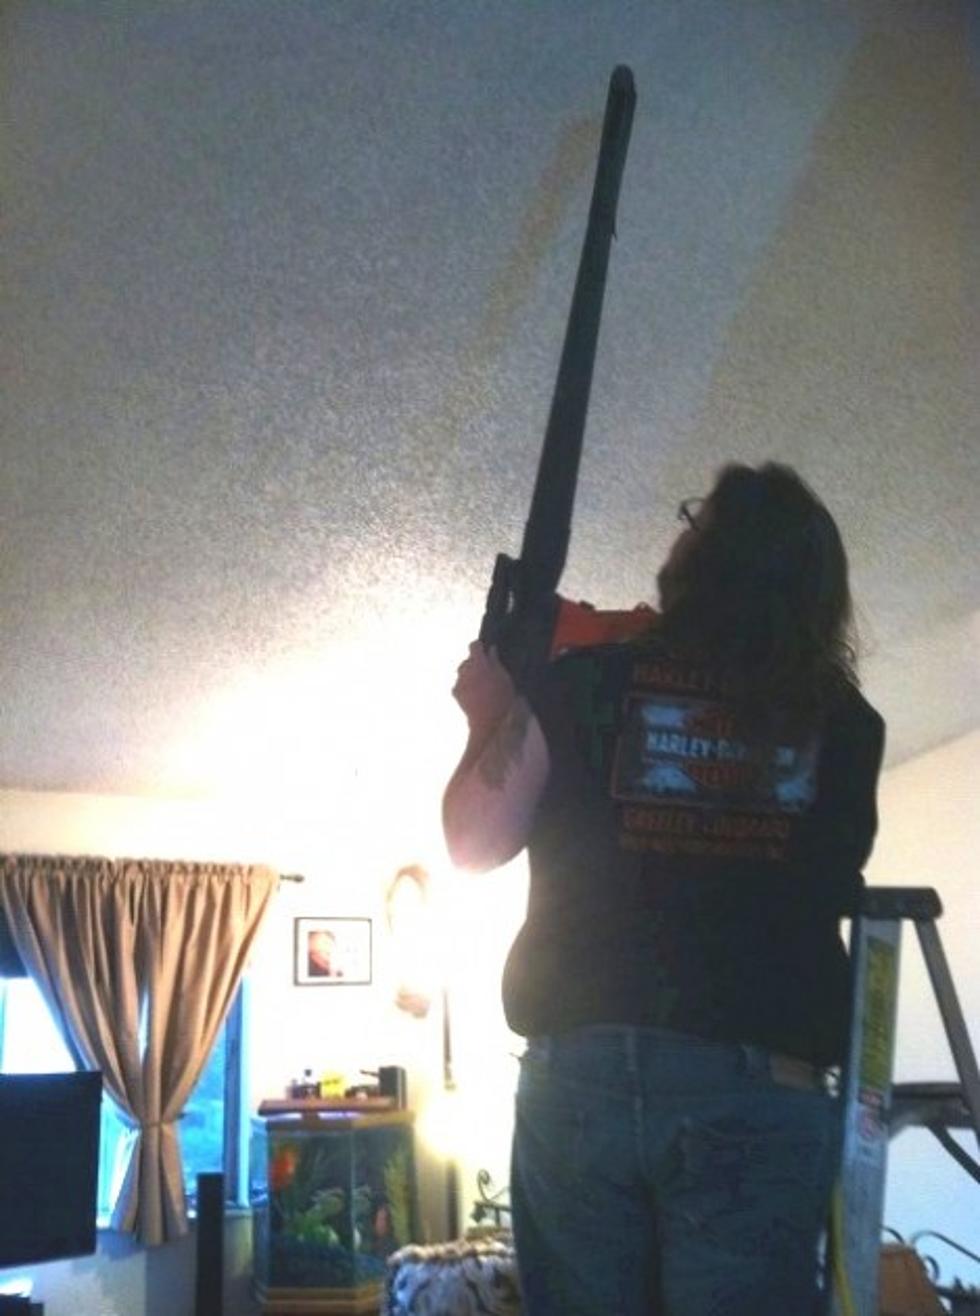 Brian Shows You How to Clean the Ceiling With a Leaf Blower [VIDEO]